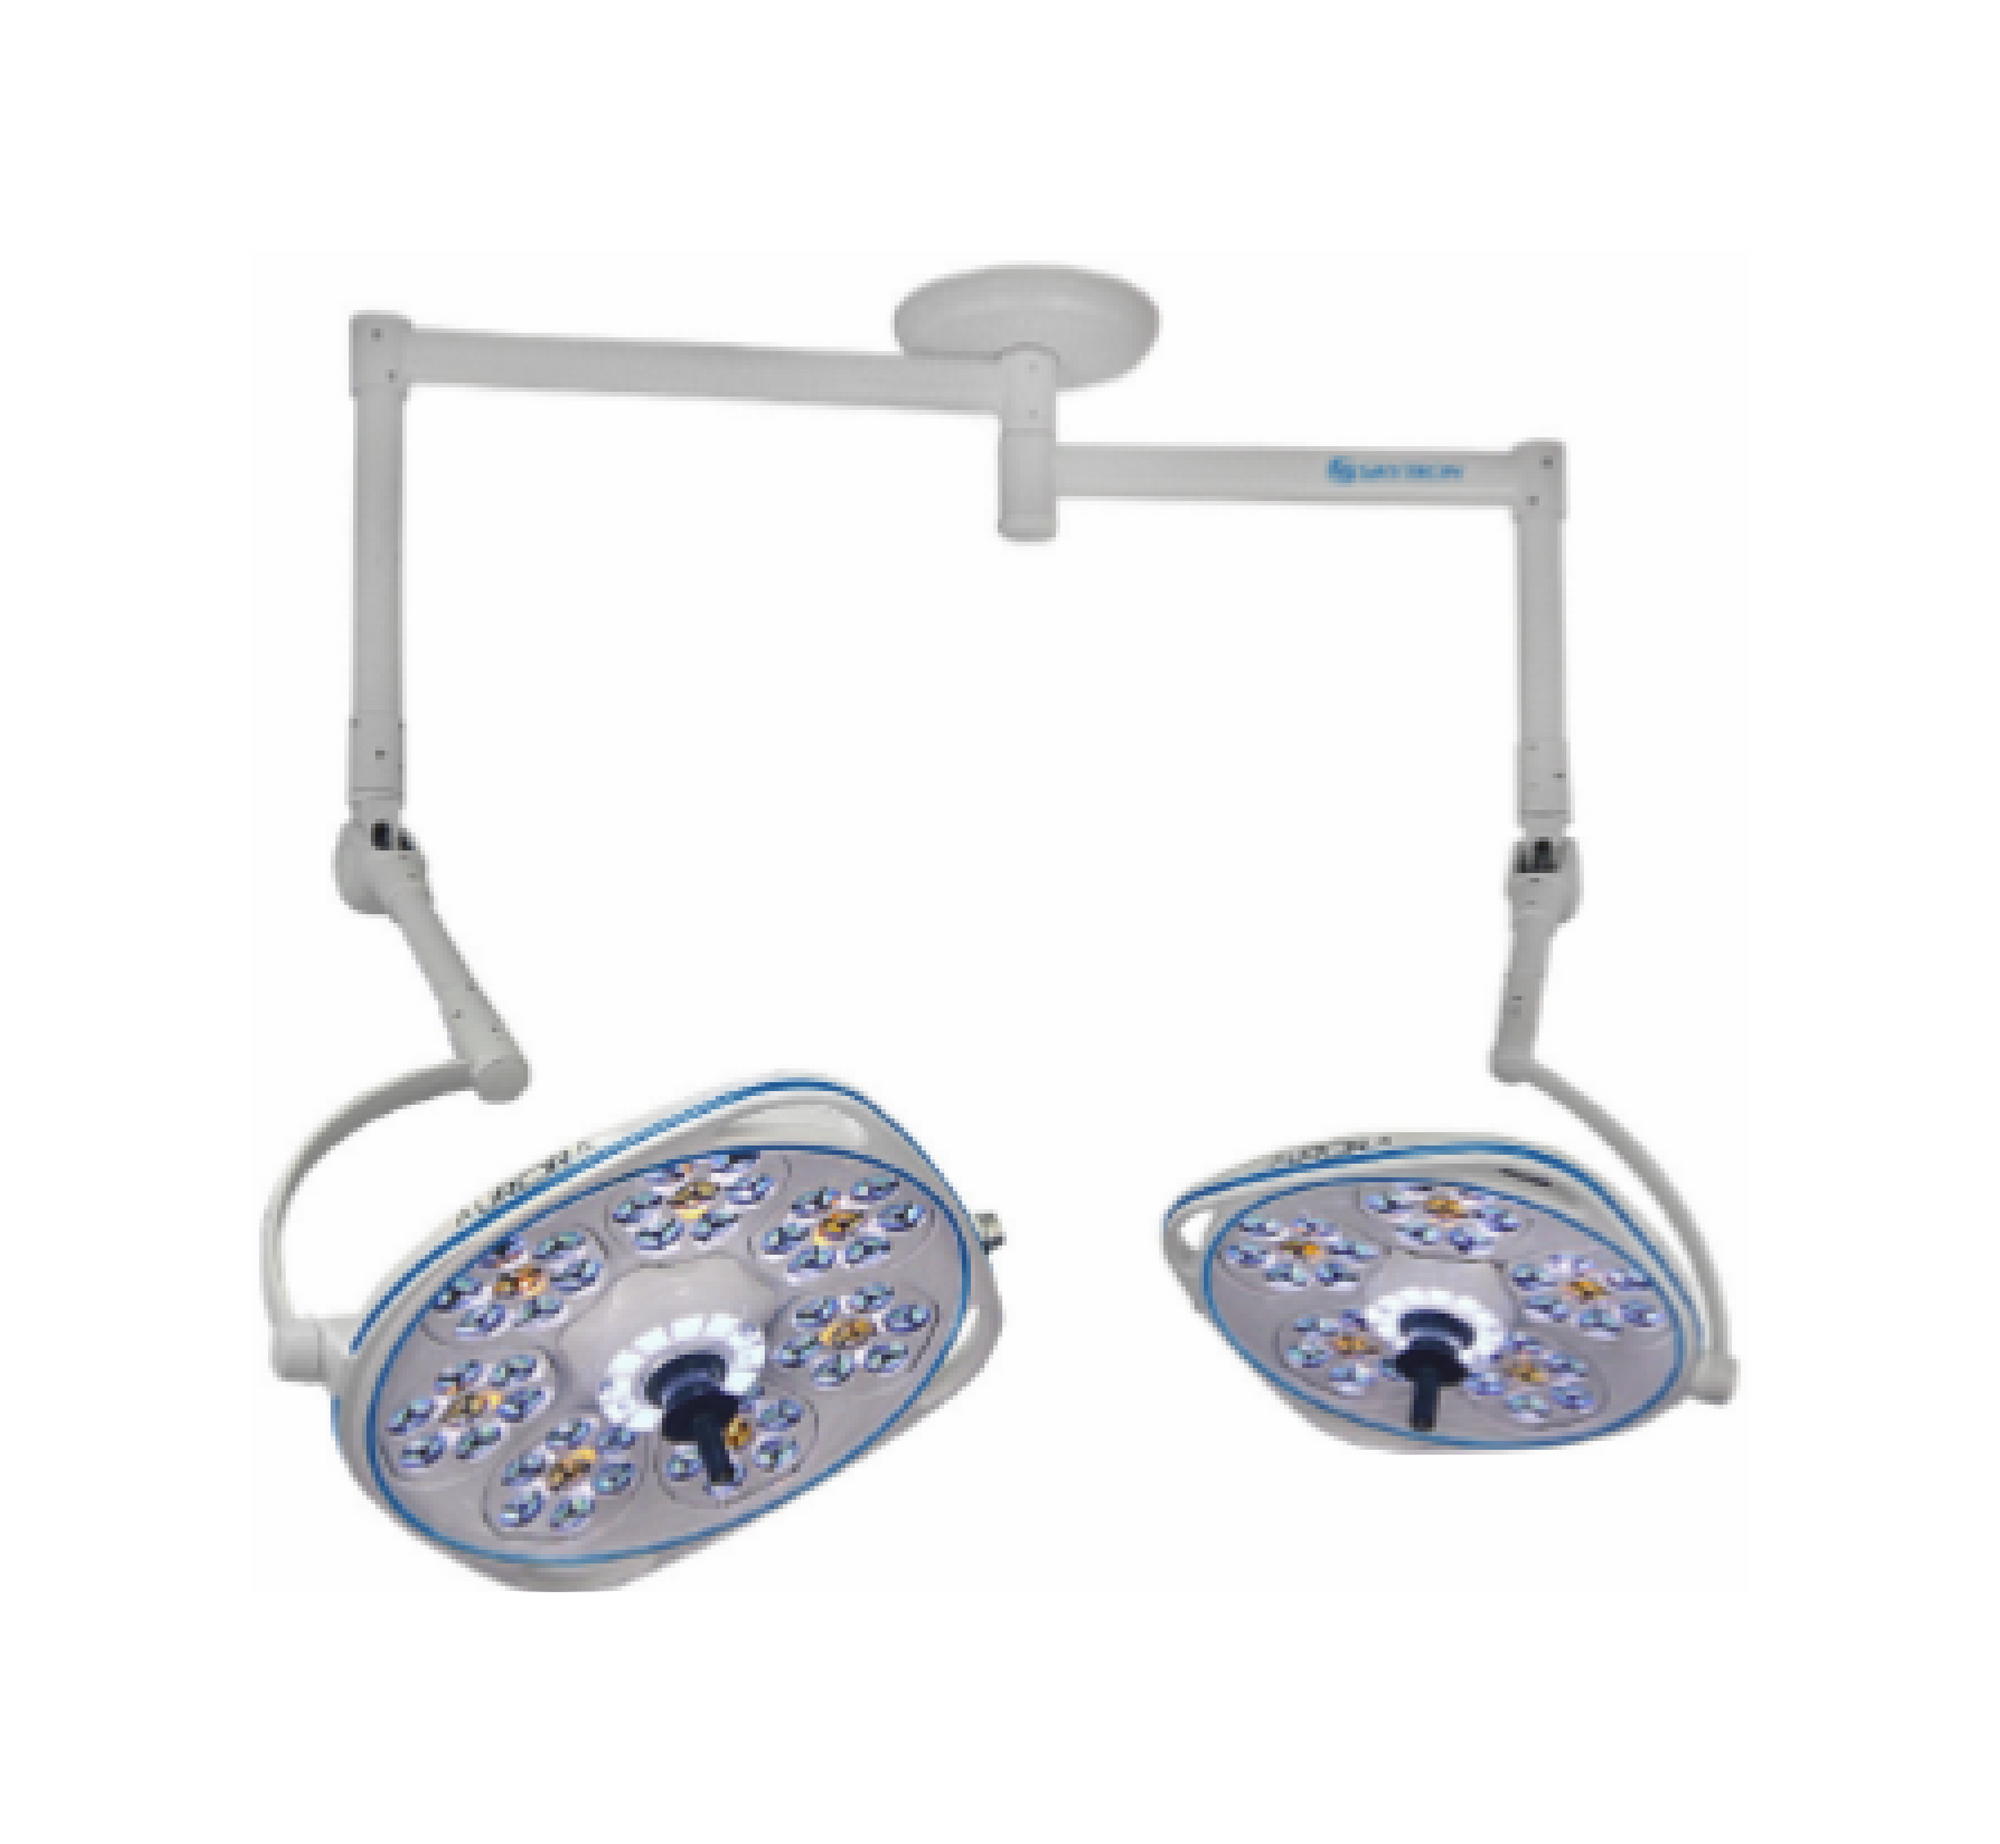 Dual, Variable-Focus 30/24 Inch LED Surgical Lighting Fixture